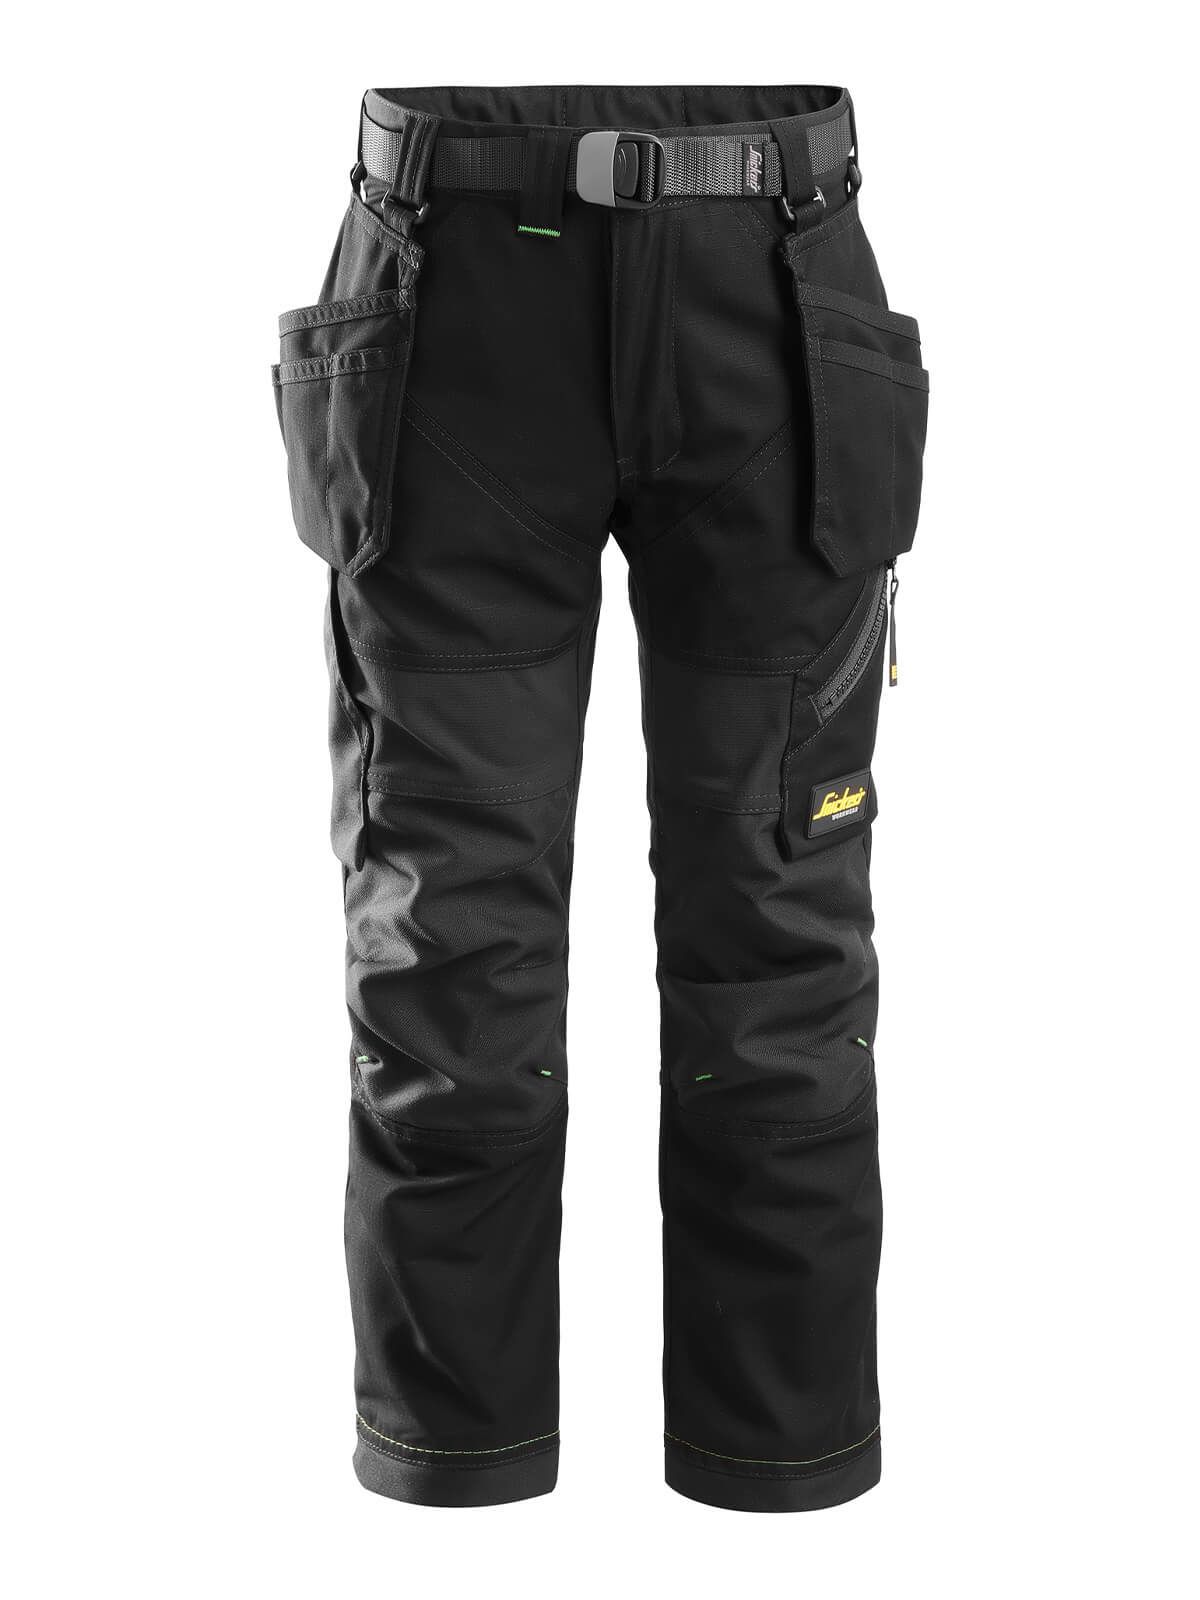 Snickers Workwear 6972 FlexiWork Work Trousers + Detachable Holster Pockets  7 - YouTube